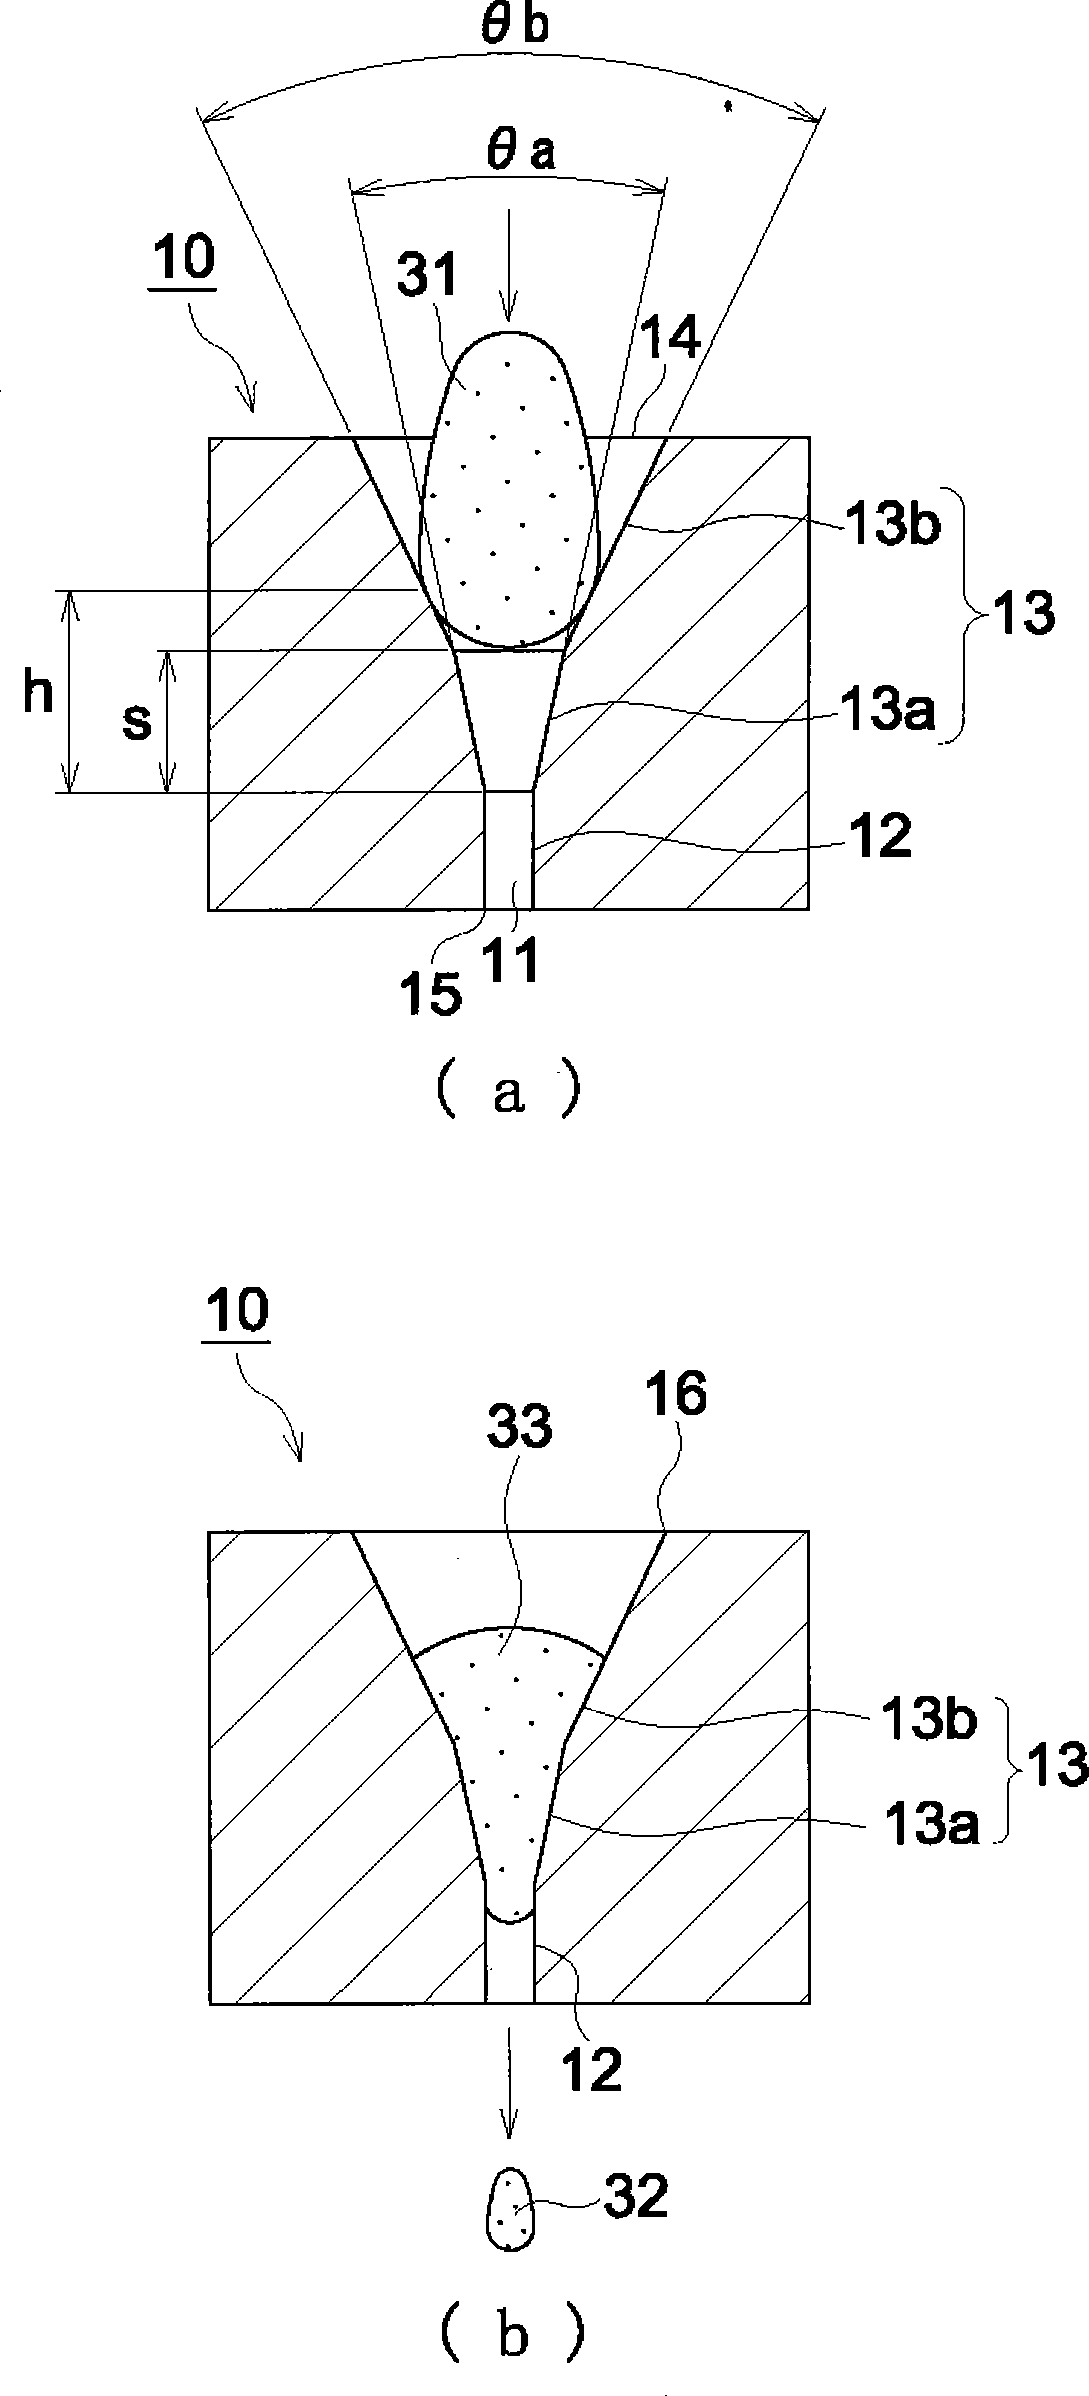 Member for miniaturizing molten glass droplet, method for producing glass gob, method for producing glass molding, and method for producing minute glass droplet